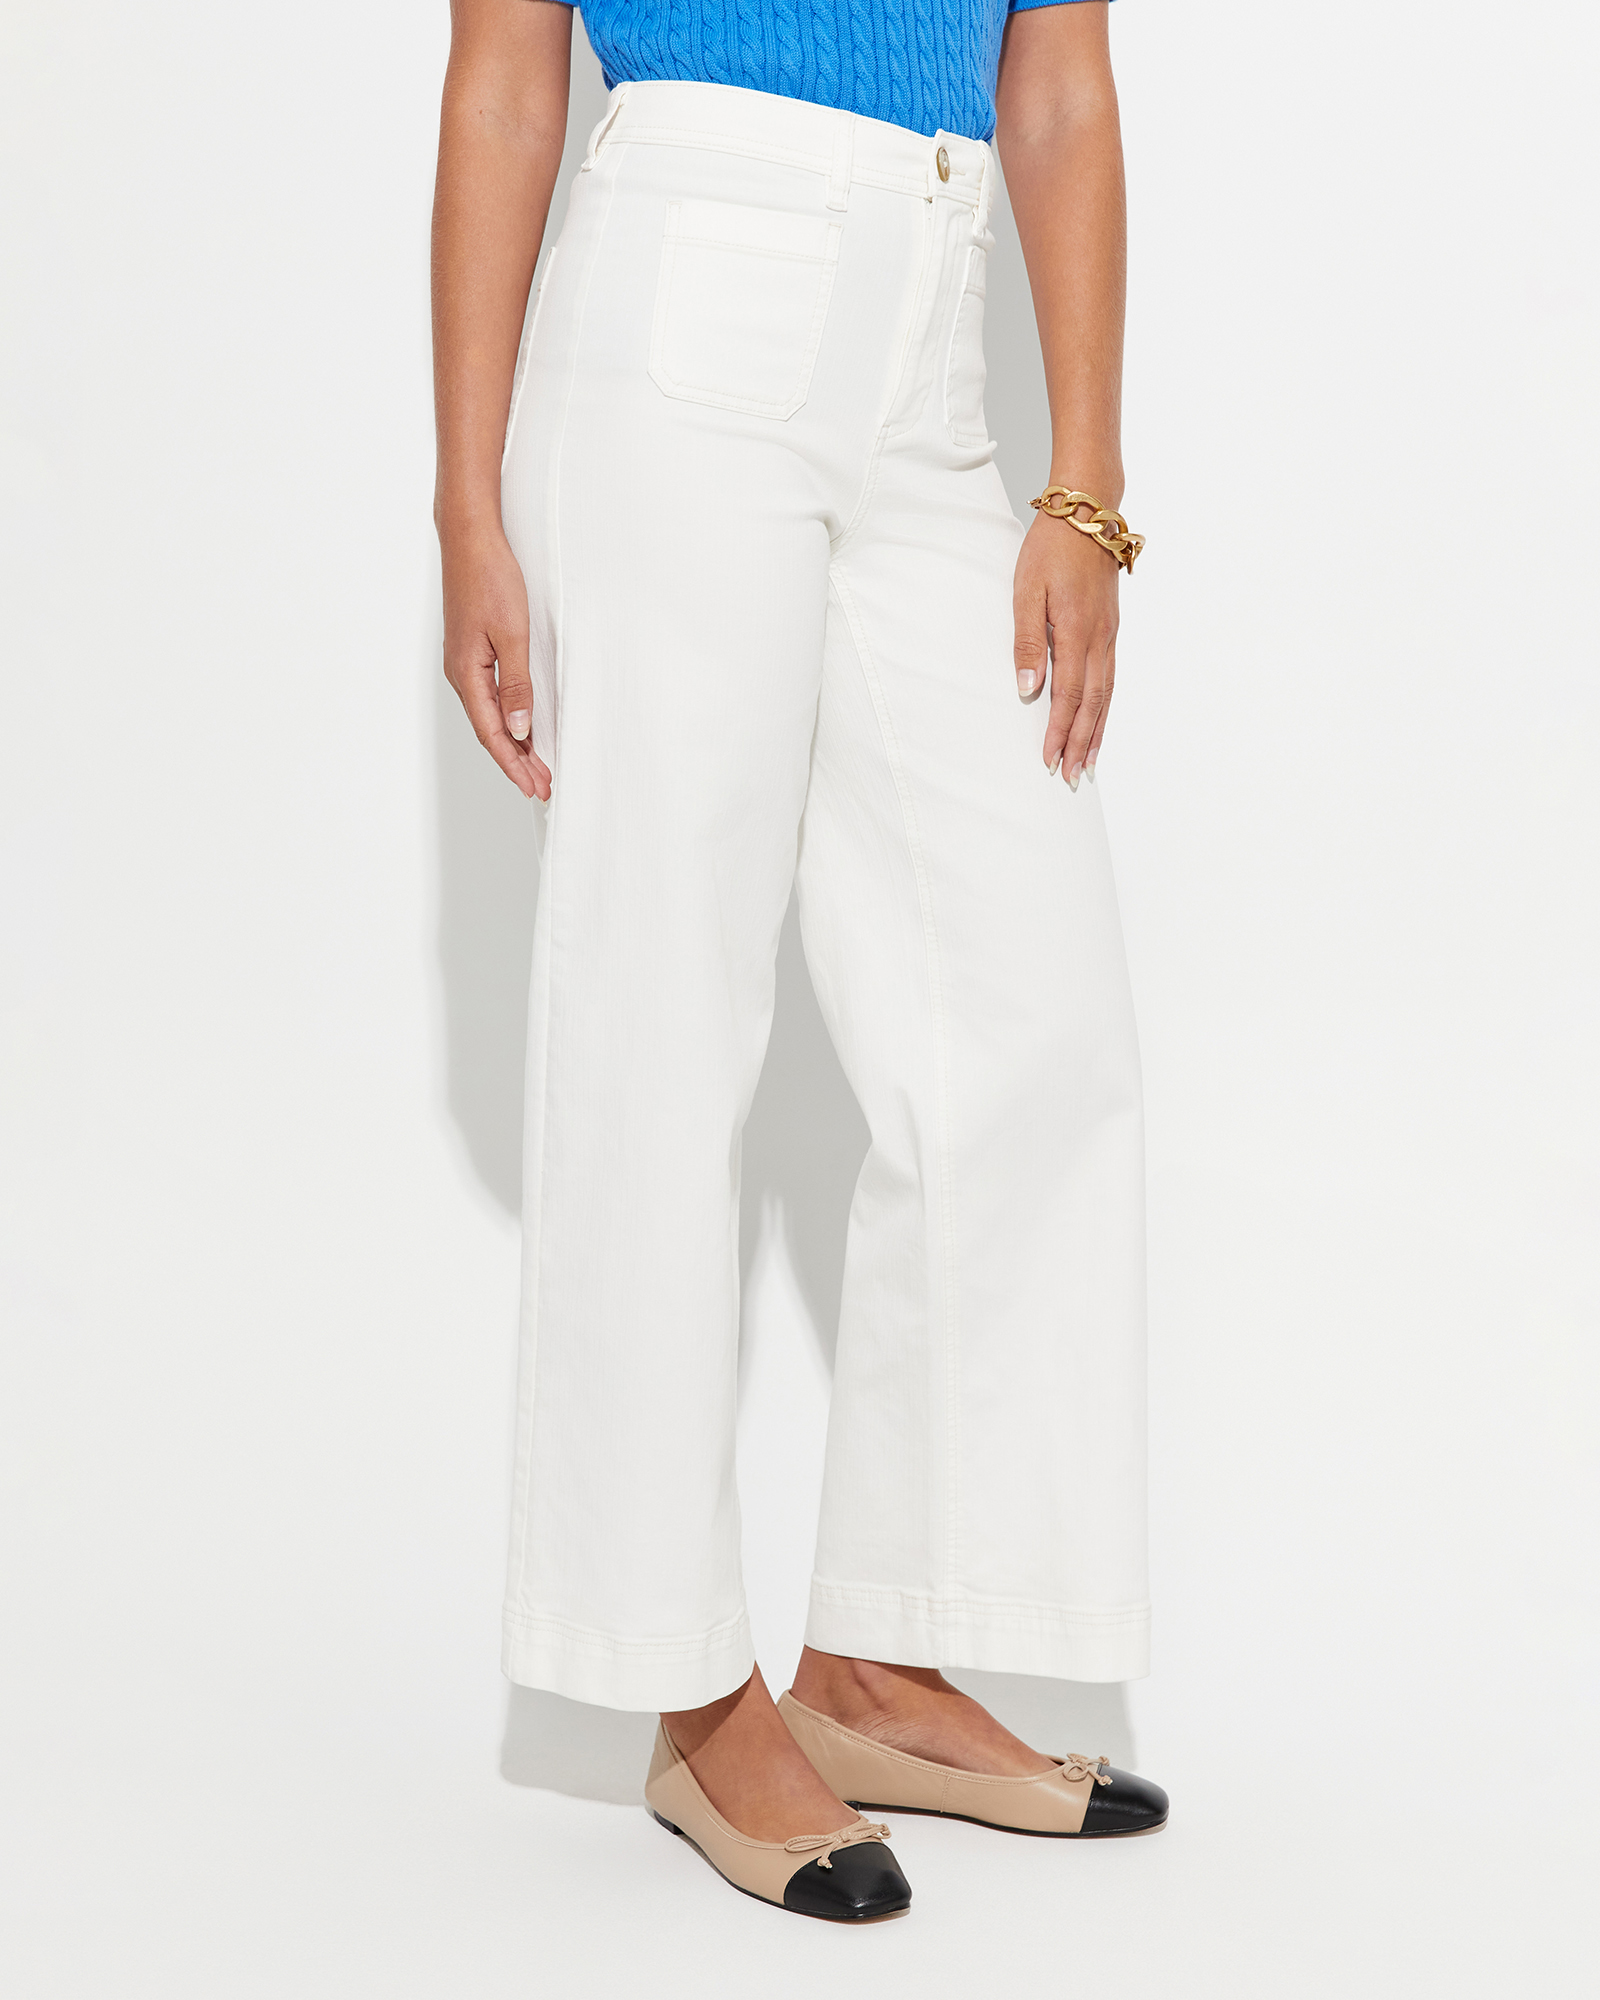 Top more than 166 high waisted white denim jeans